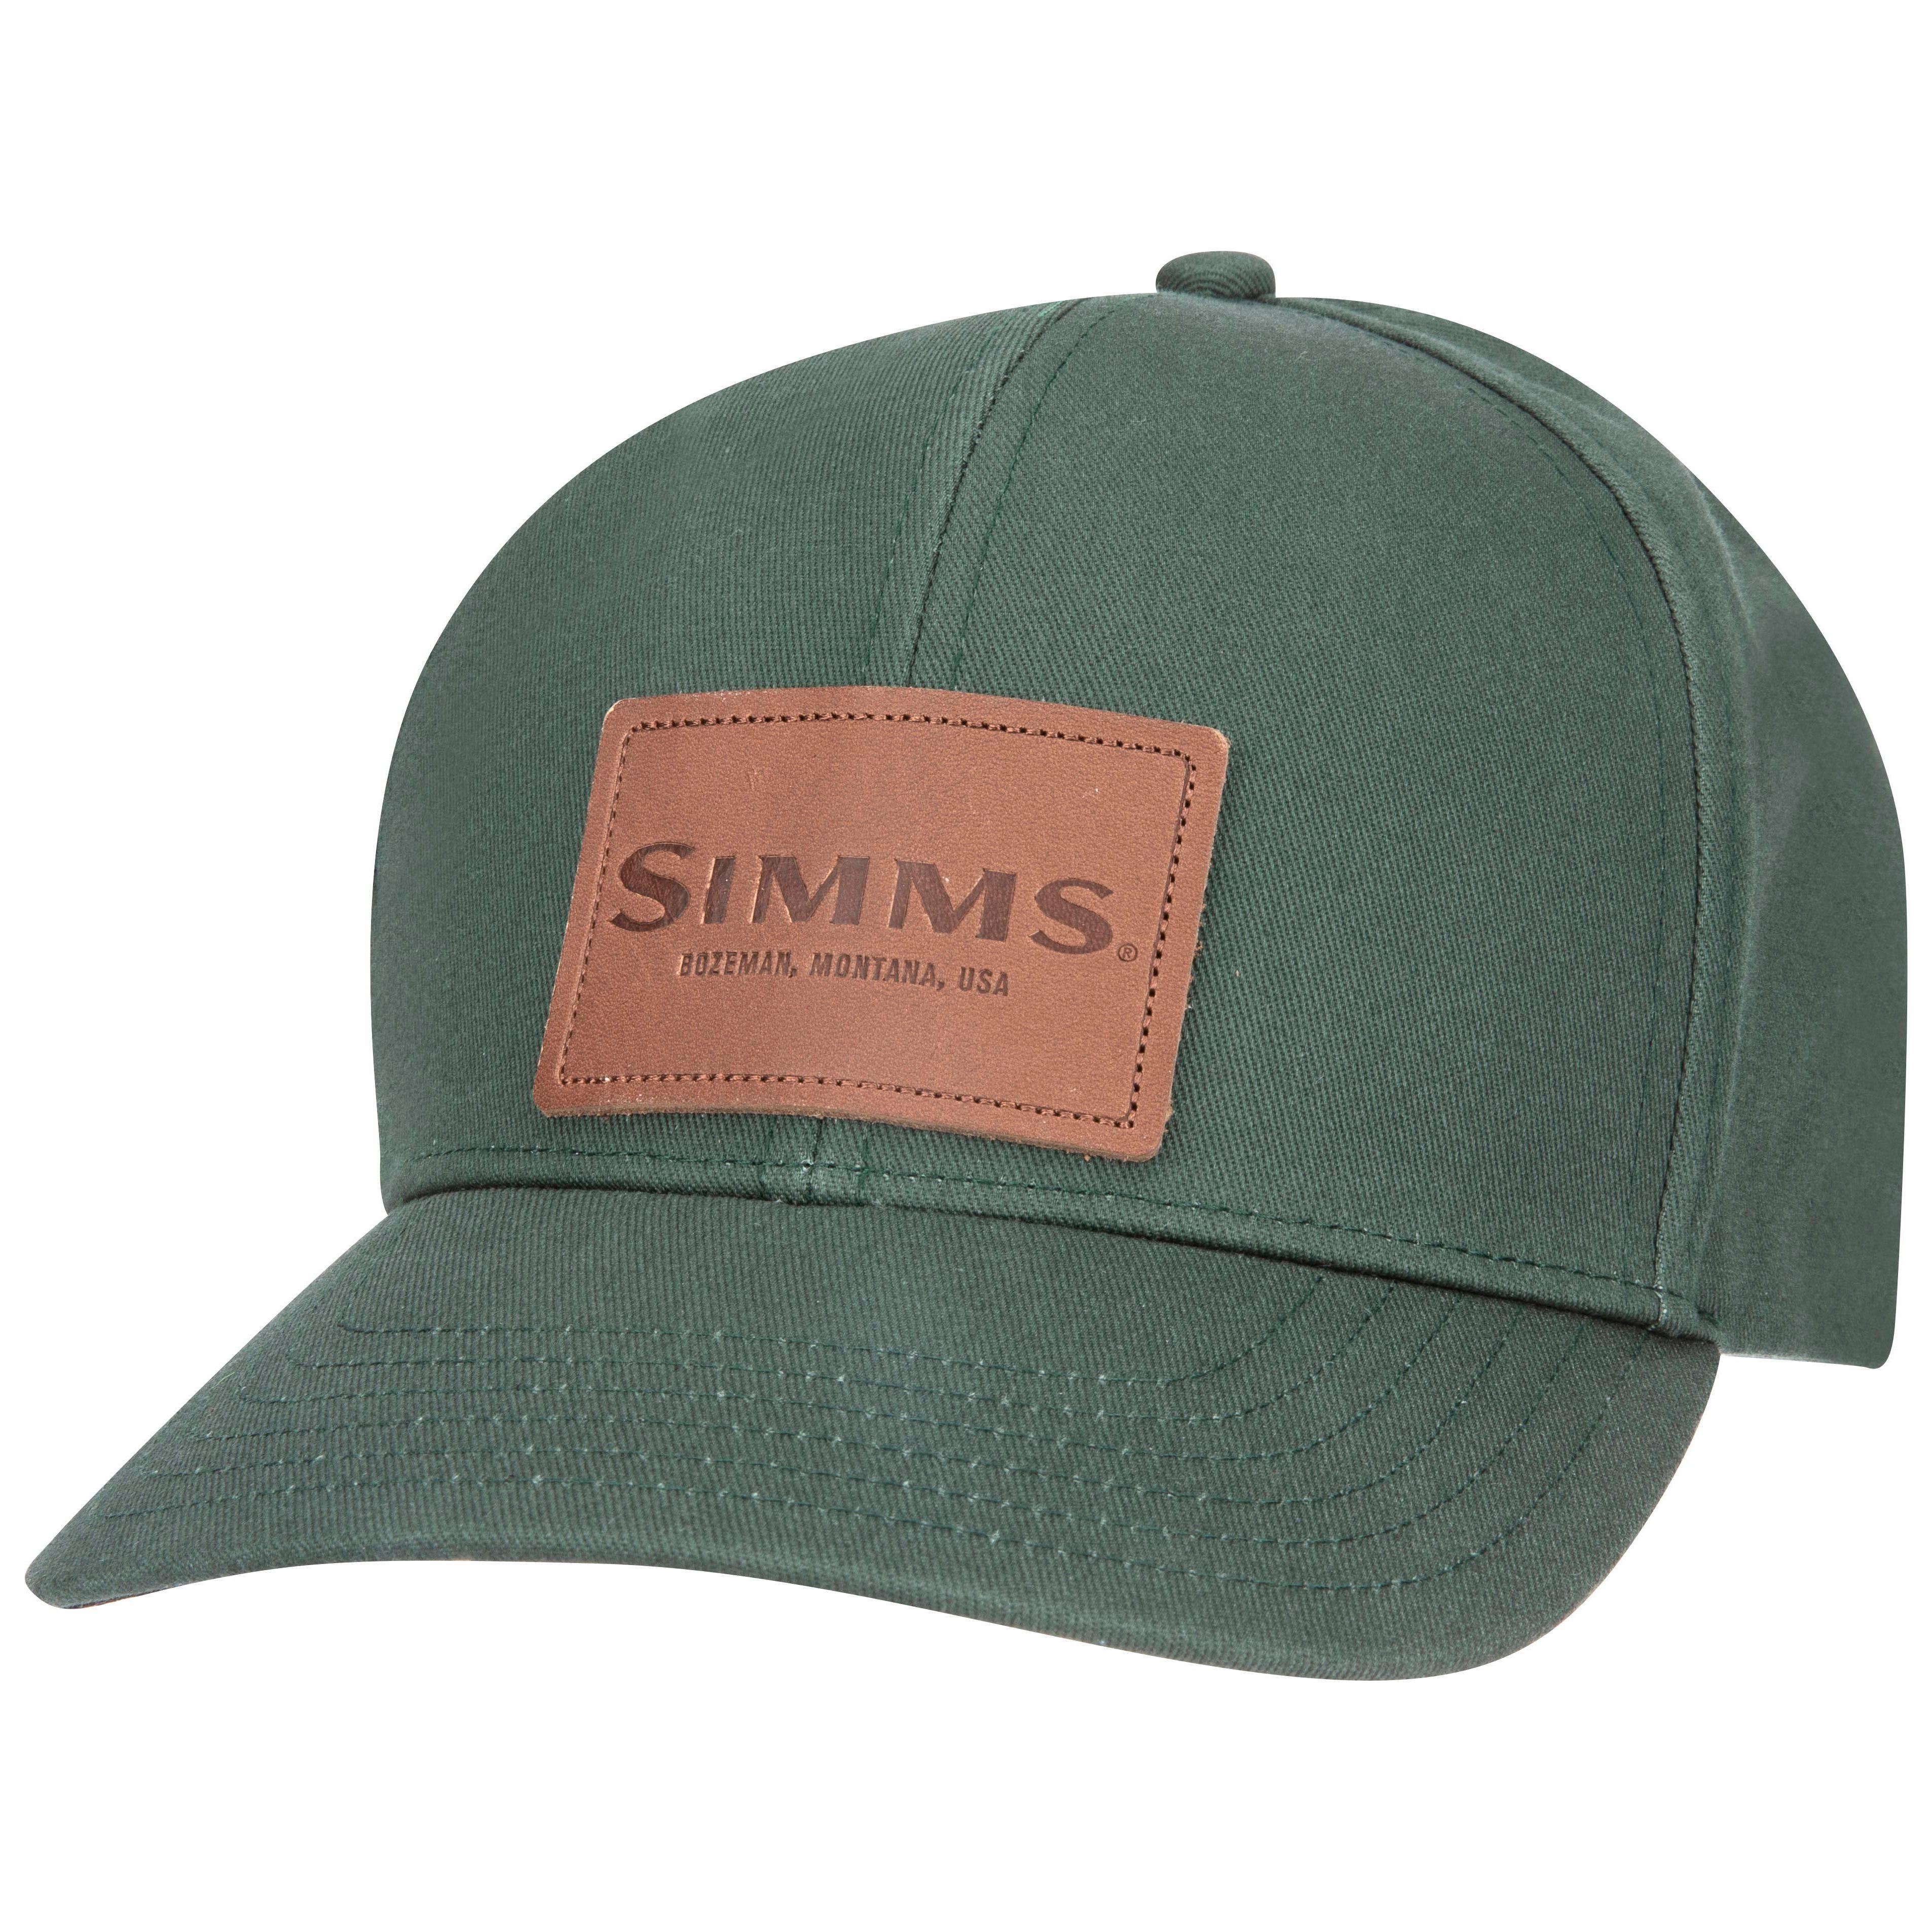 Simms Leather Patch Cap - Foliage